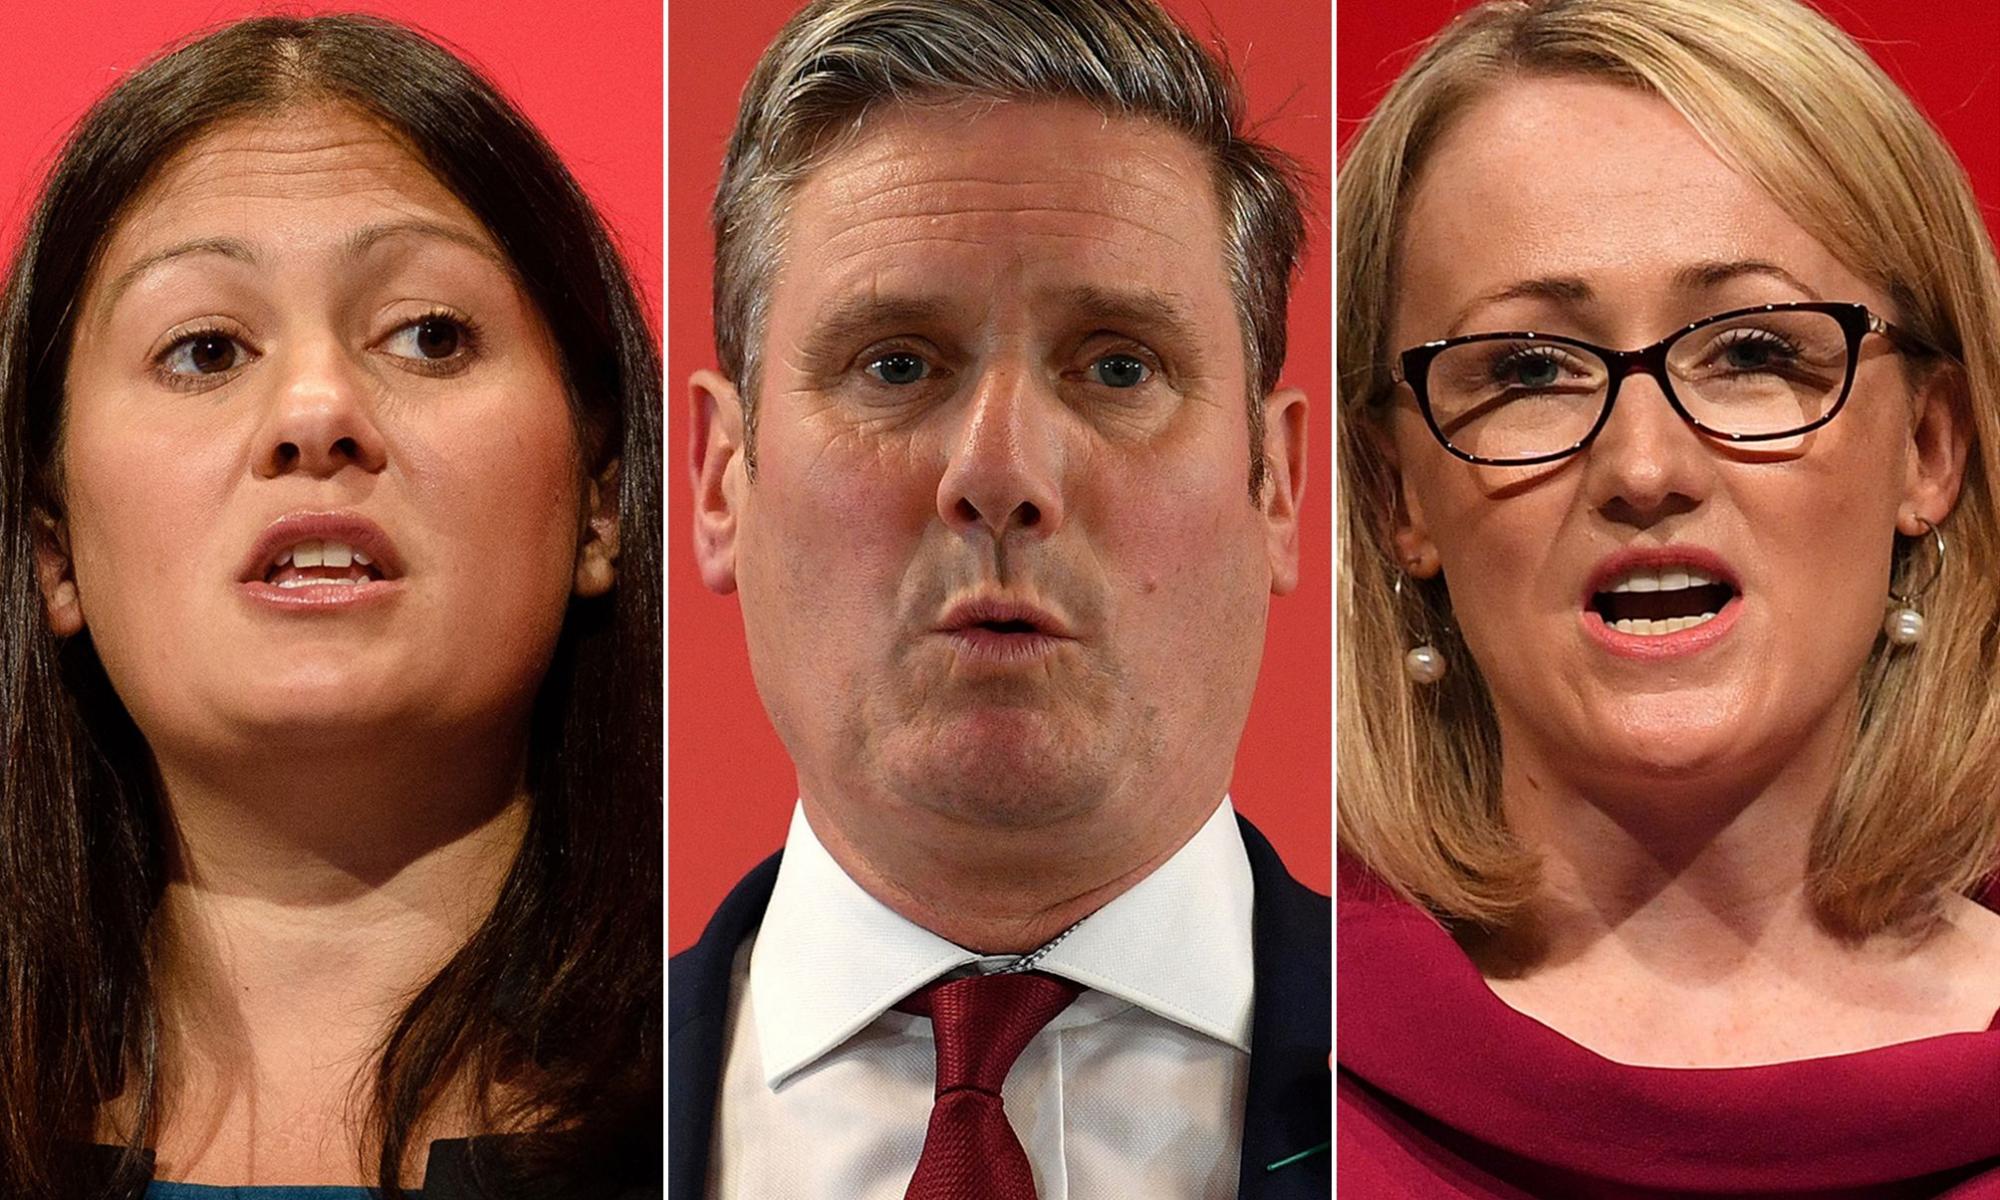 Labour candidates set out detailed plans for tackling climate crisis